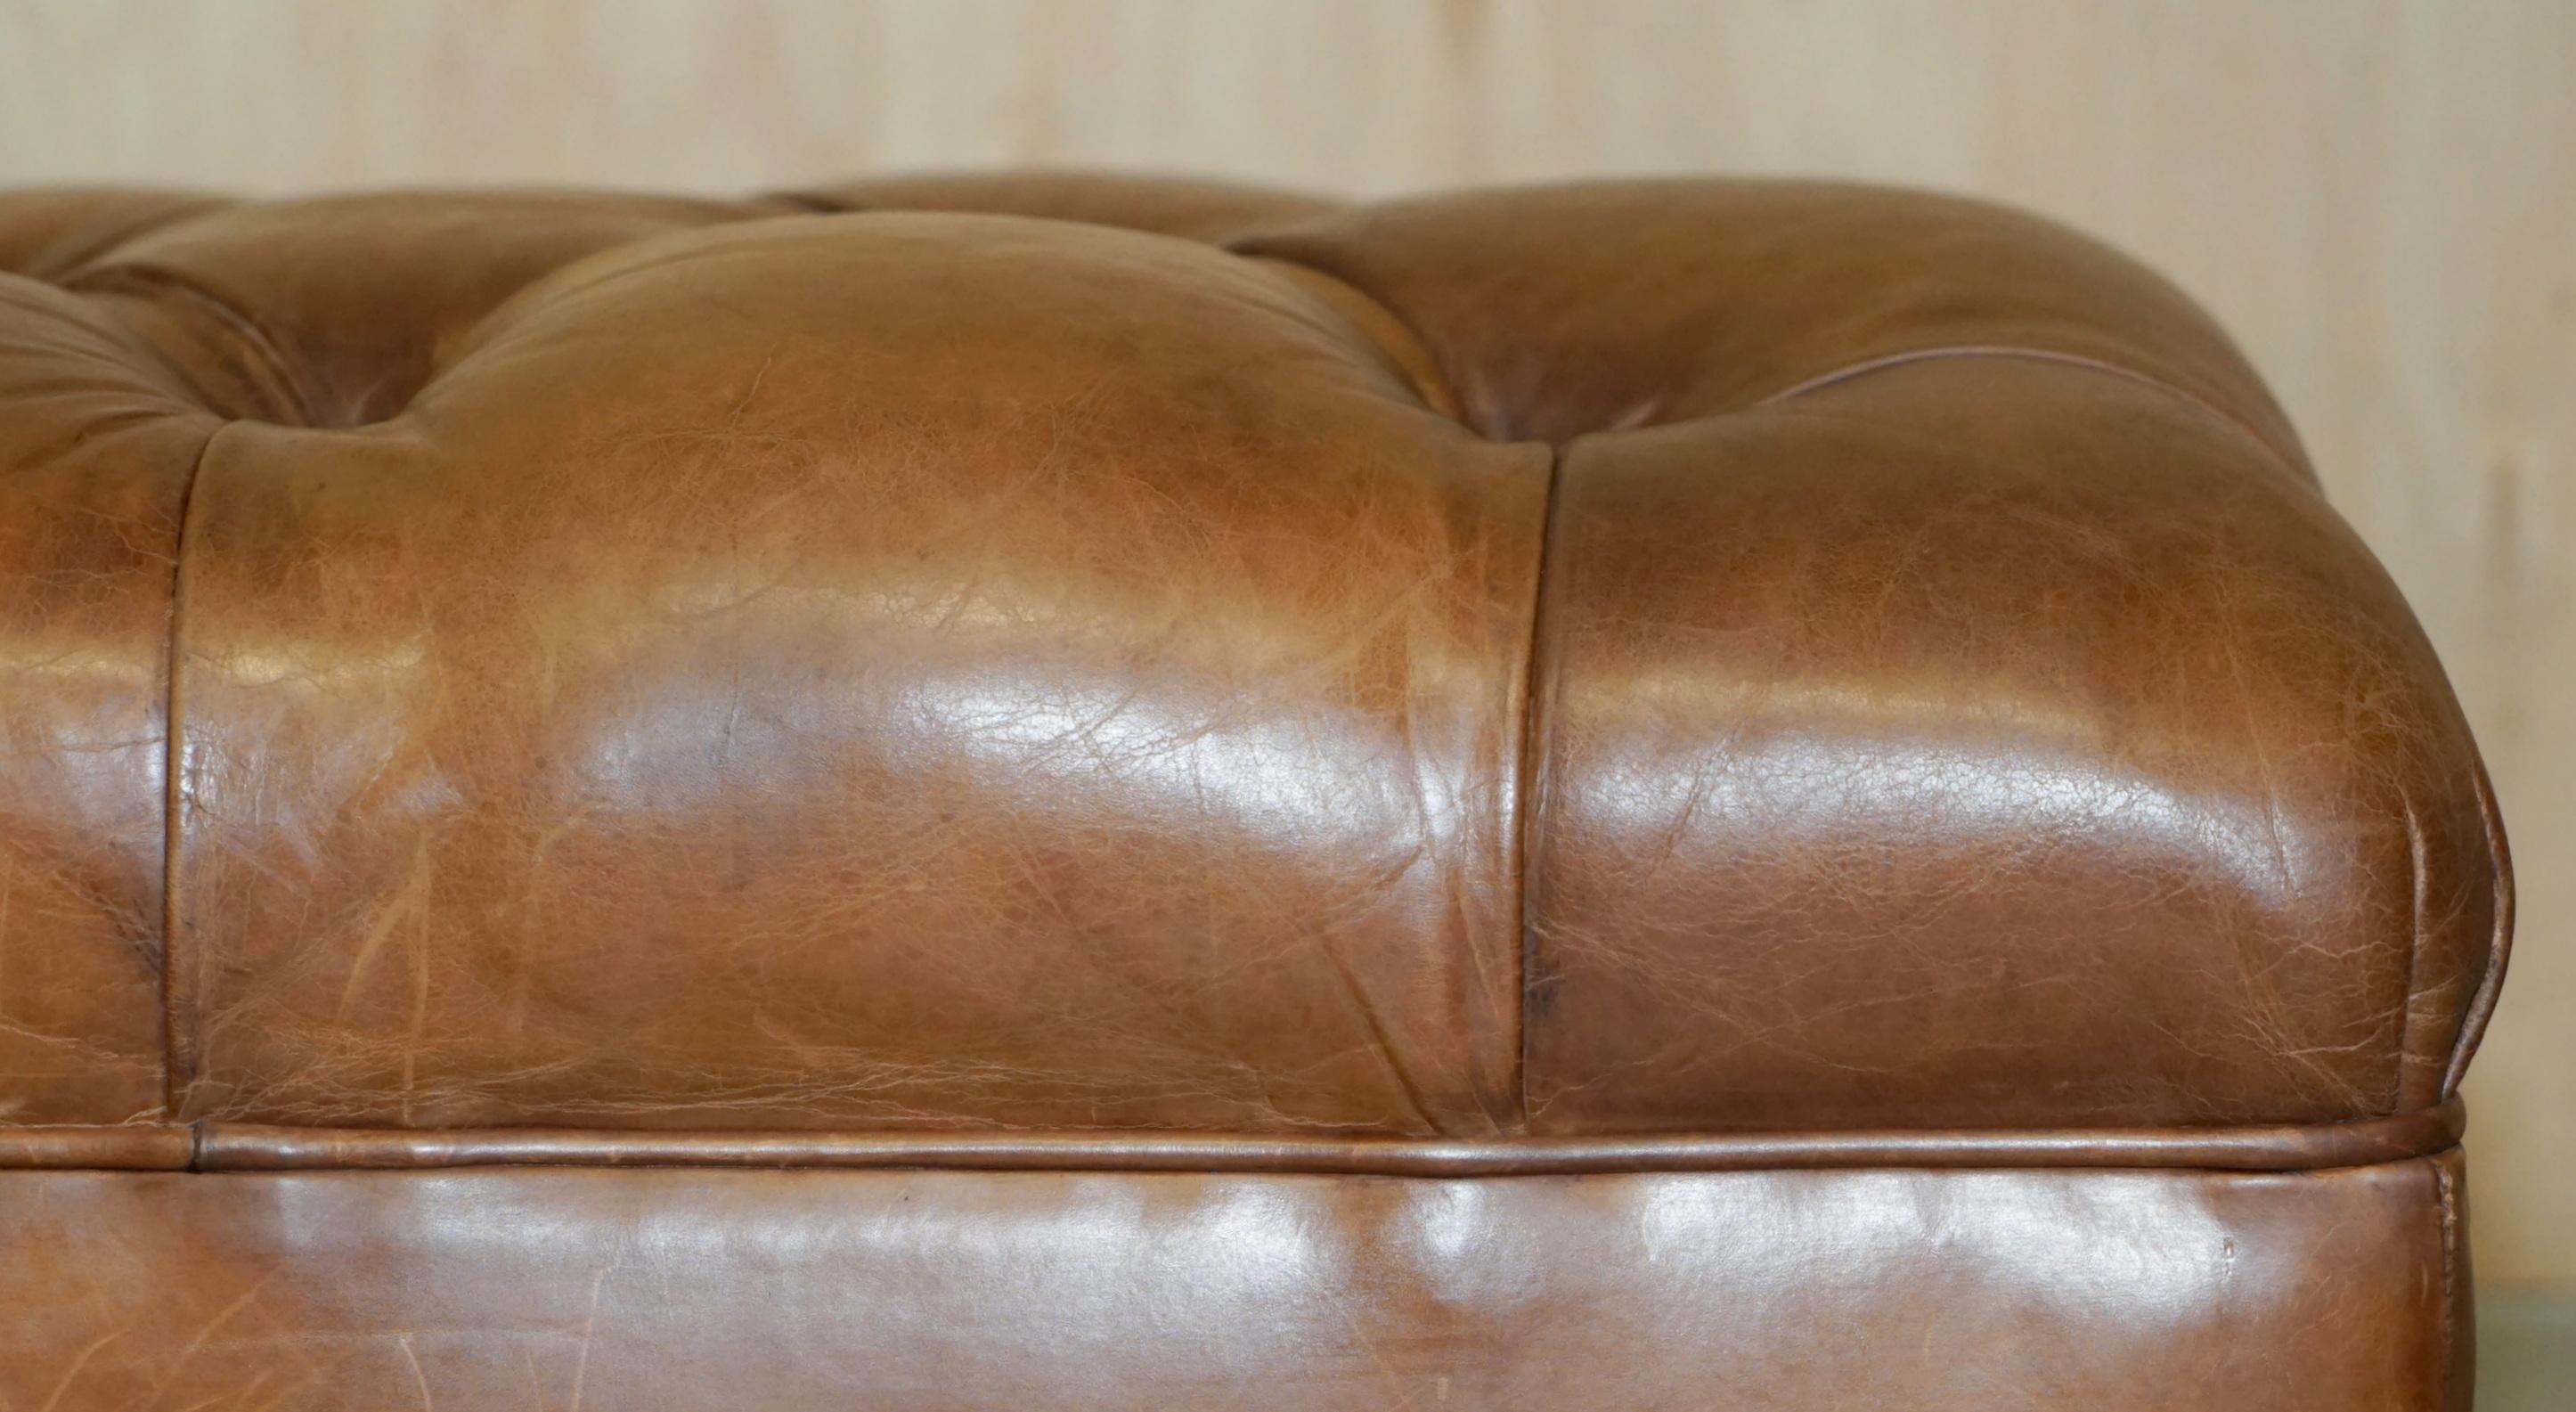 Leather RALPH LAUREN WRITER'S CHESTERFIELD FOOTSTOOL OTTOMAN IN HERiTAGE BROWN LEATHER